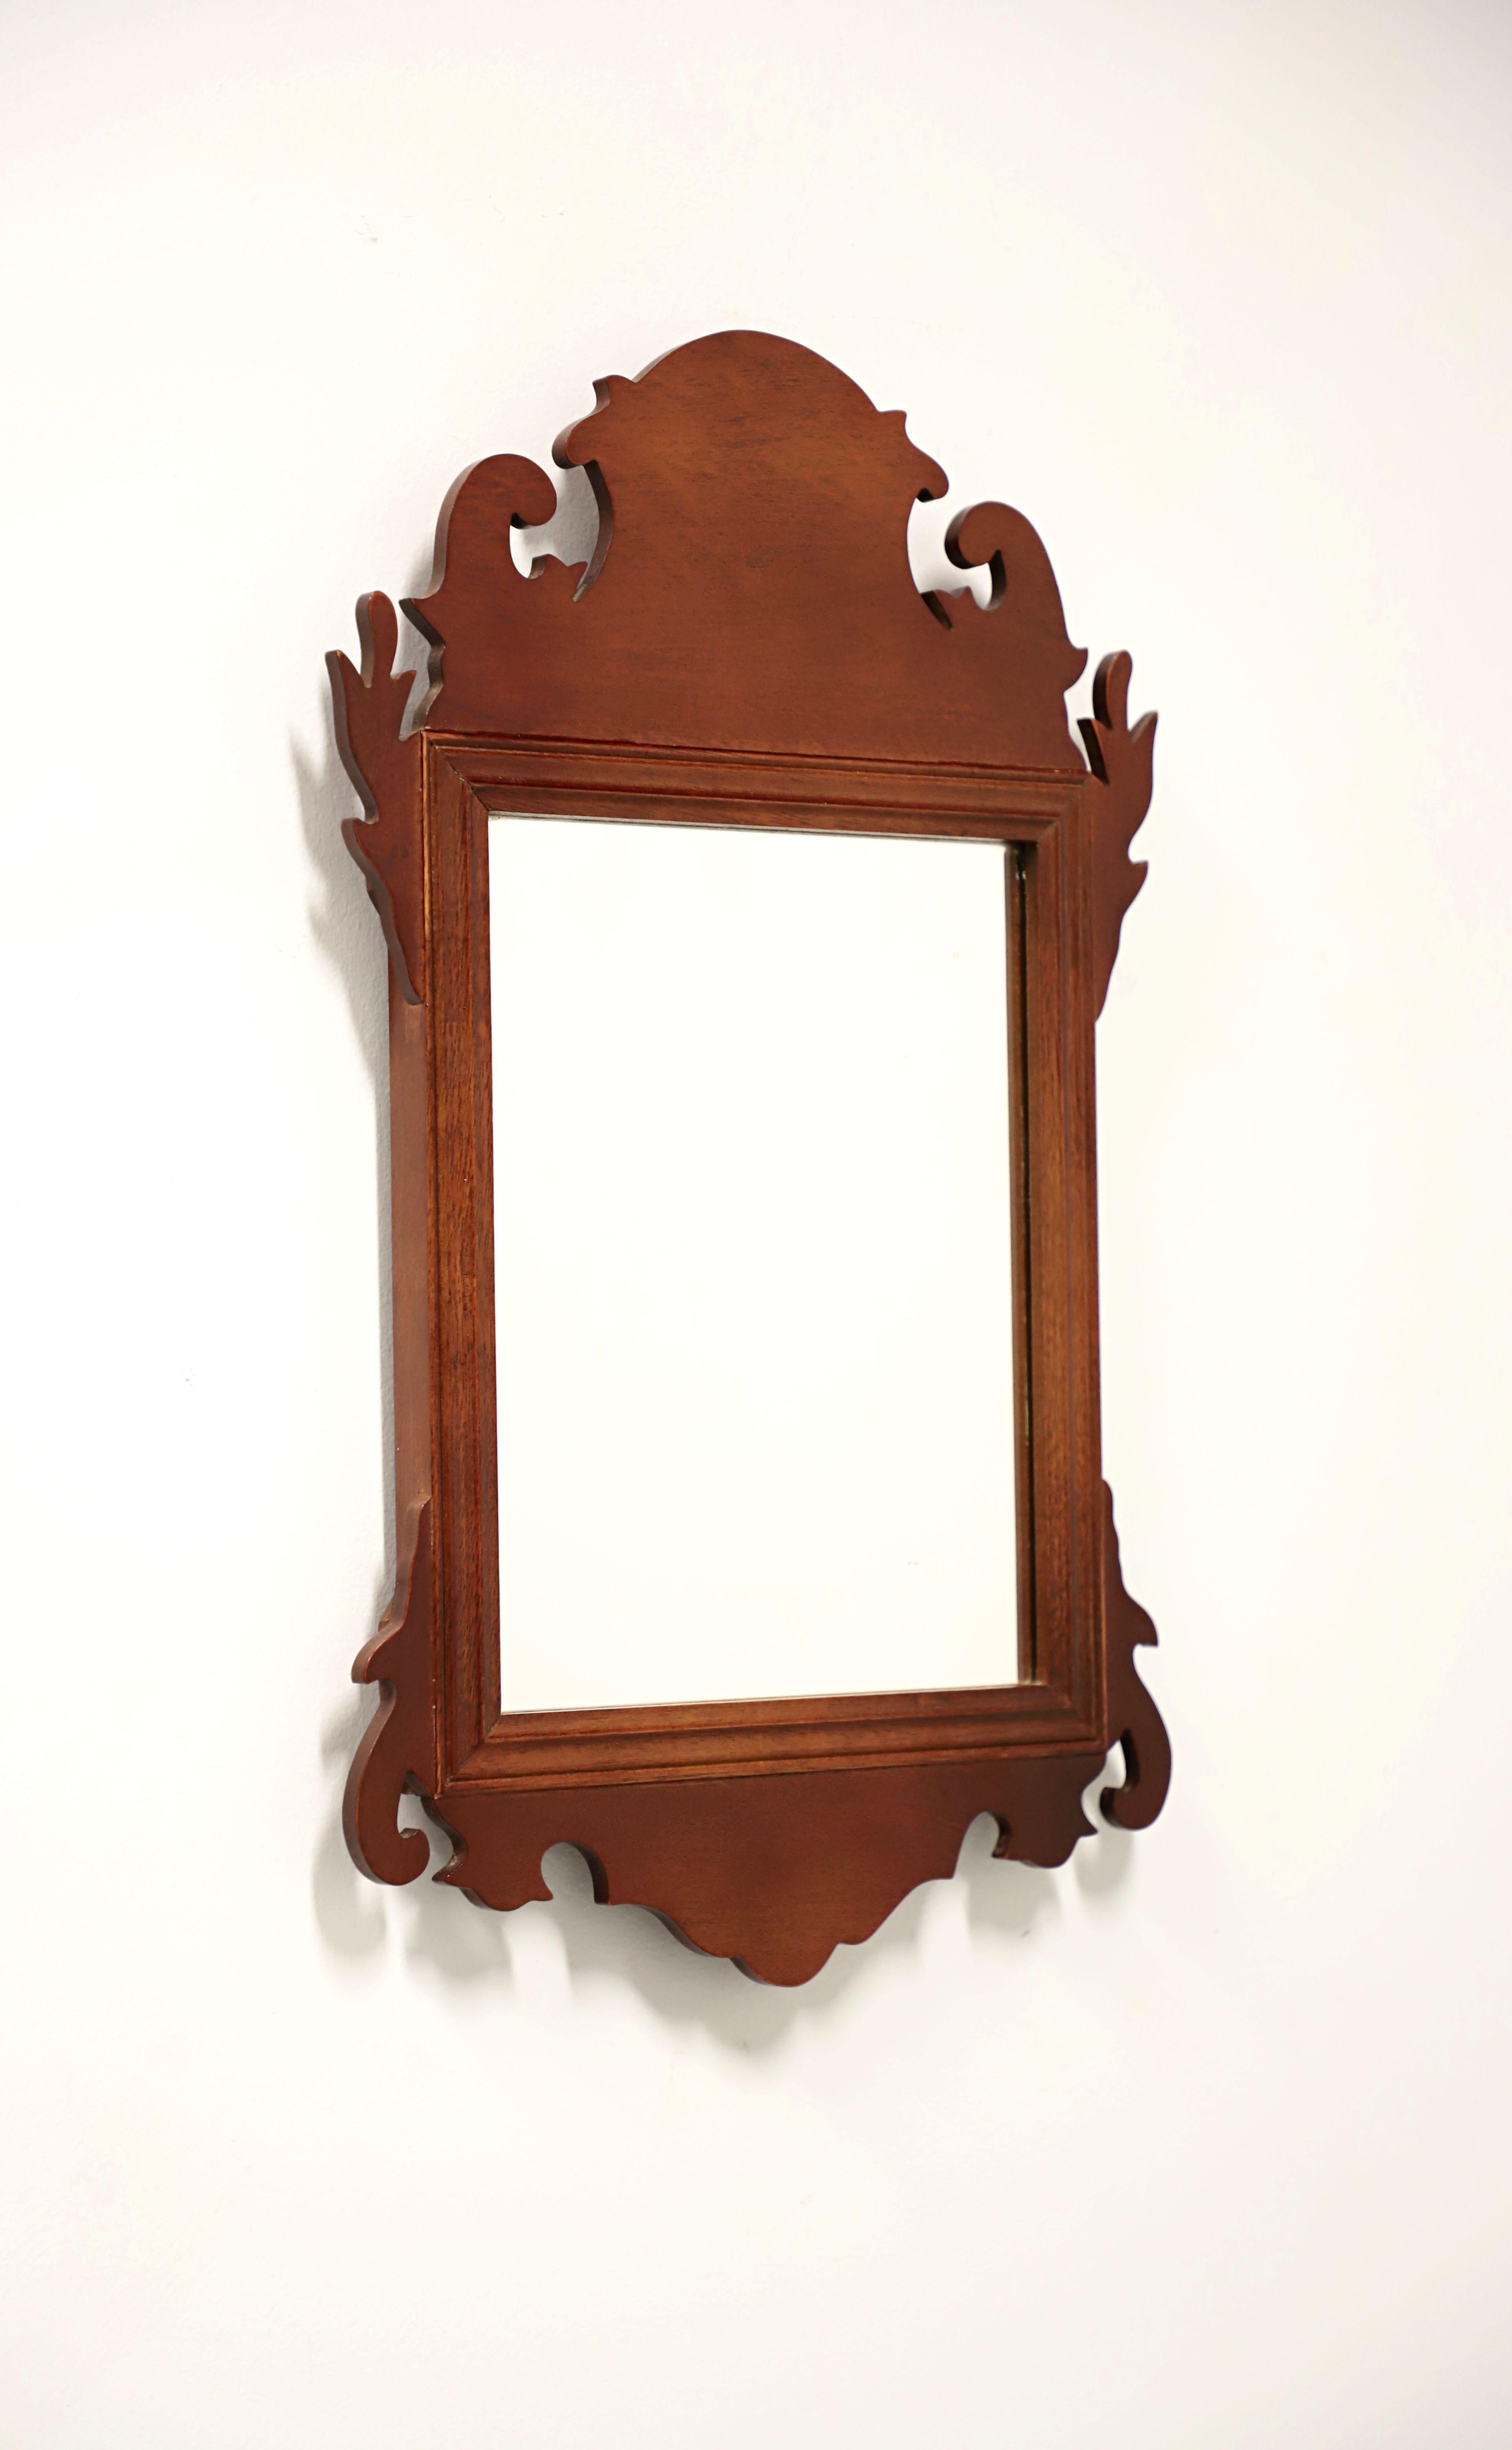 A Chippendale style petite wall mirror by Virginia Metalcrafters, from their Colonial Williamsburg Reproductions made exclusively for Colonial Williamsburg. Mirror glass, mahogany frame with decorative carving to top and bottom. Made in the USA, in